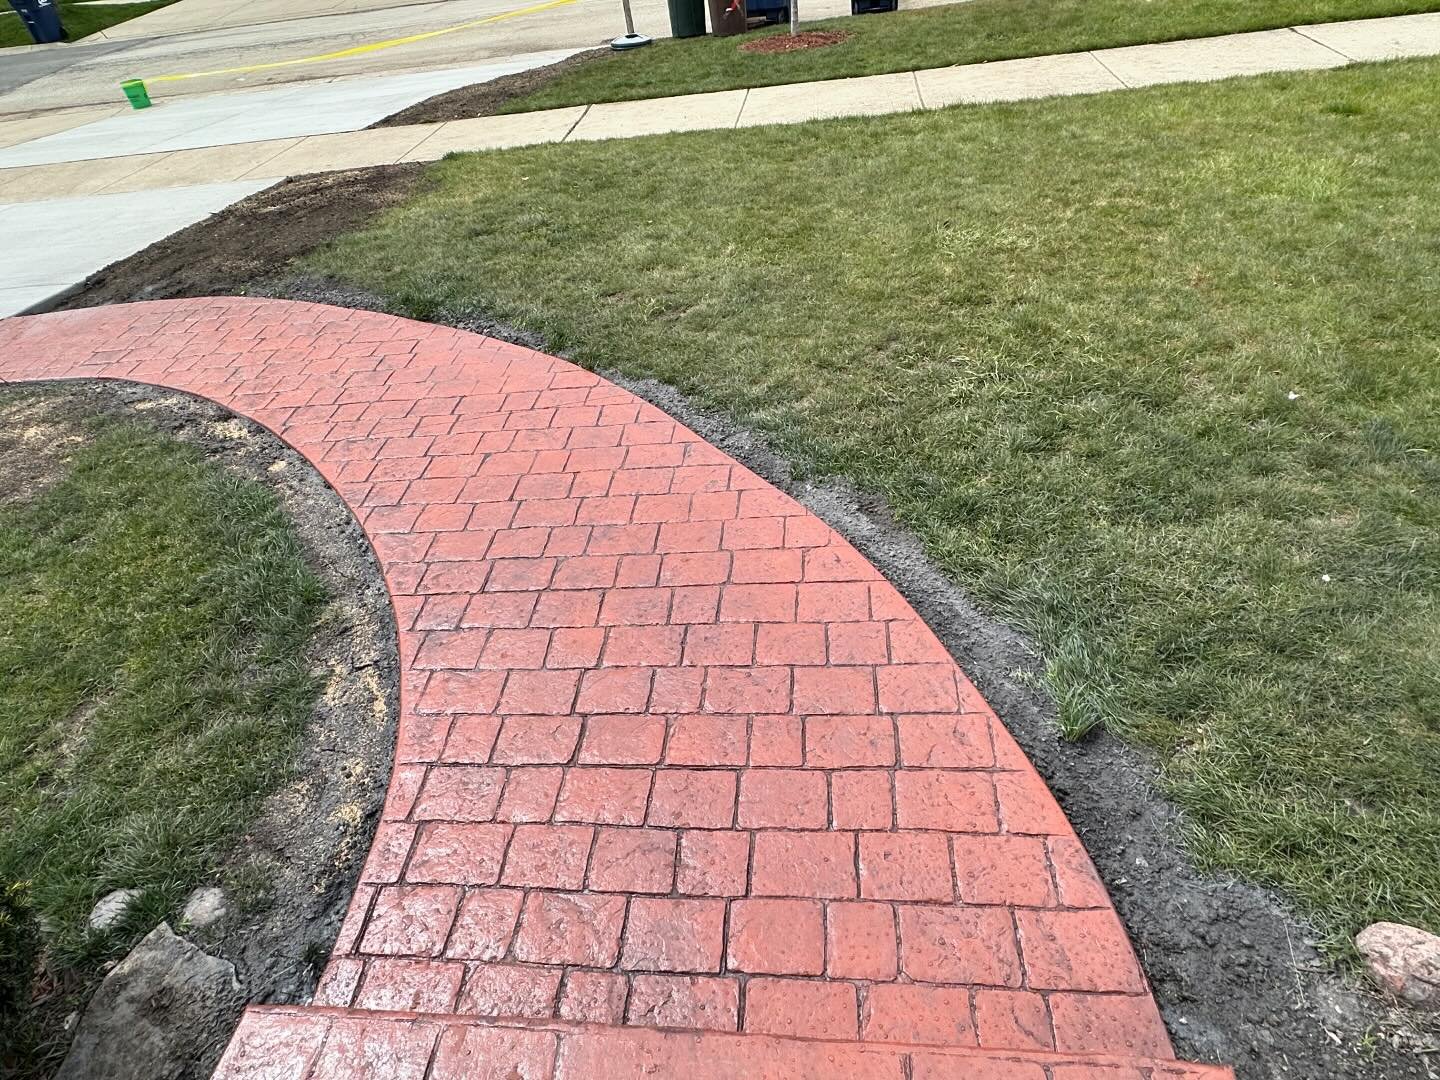 New stamped walkway. Pattern: Stamped cobblestone 
Primary Color: Hampshire Red
Grout lines/secondary color: Storm Gray